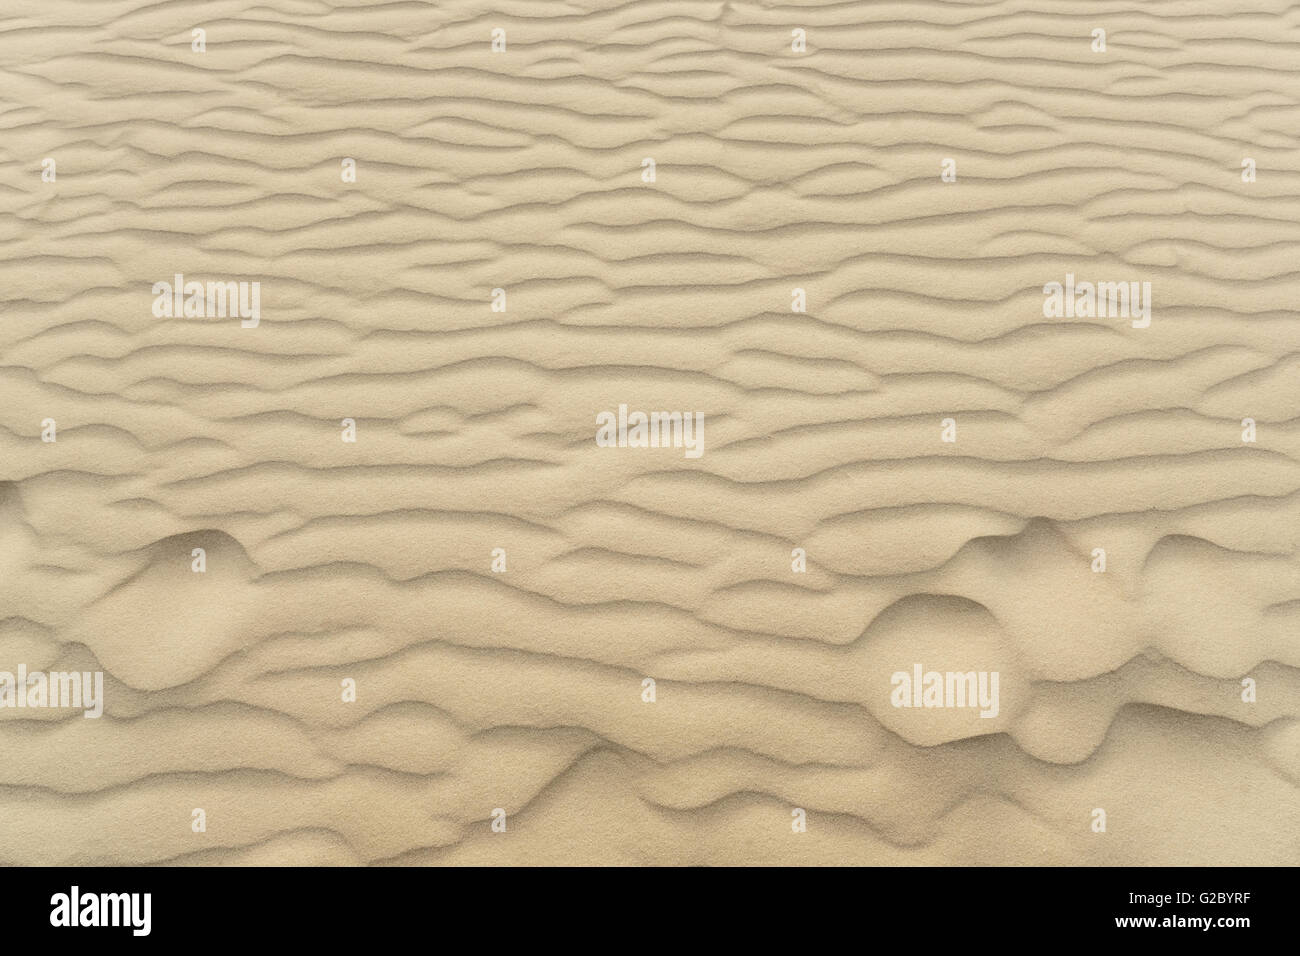 Waves of beach sand texture and background Stock Photo